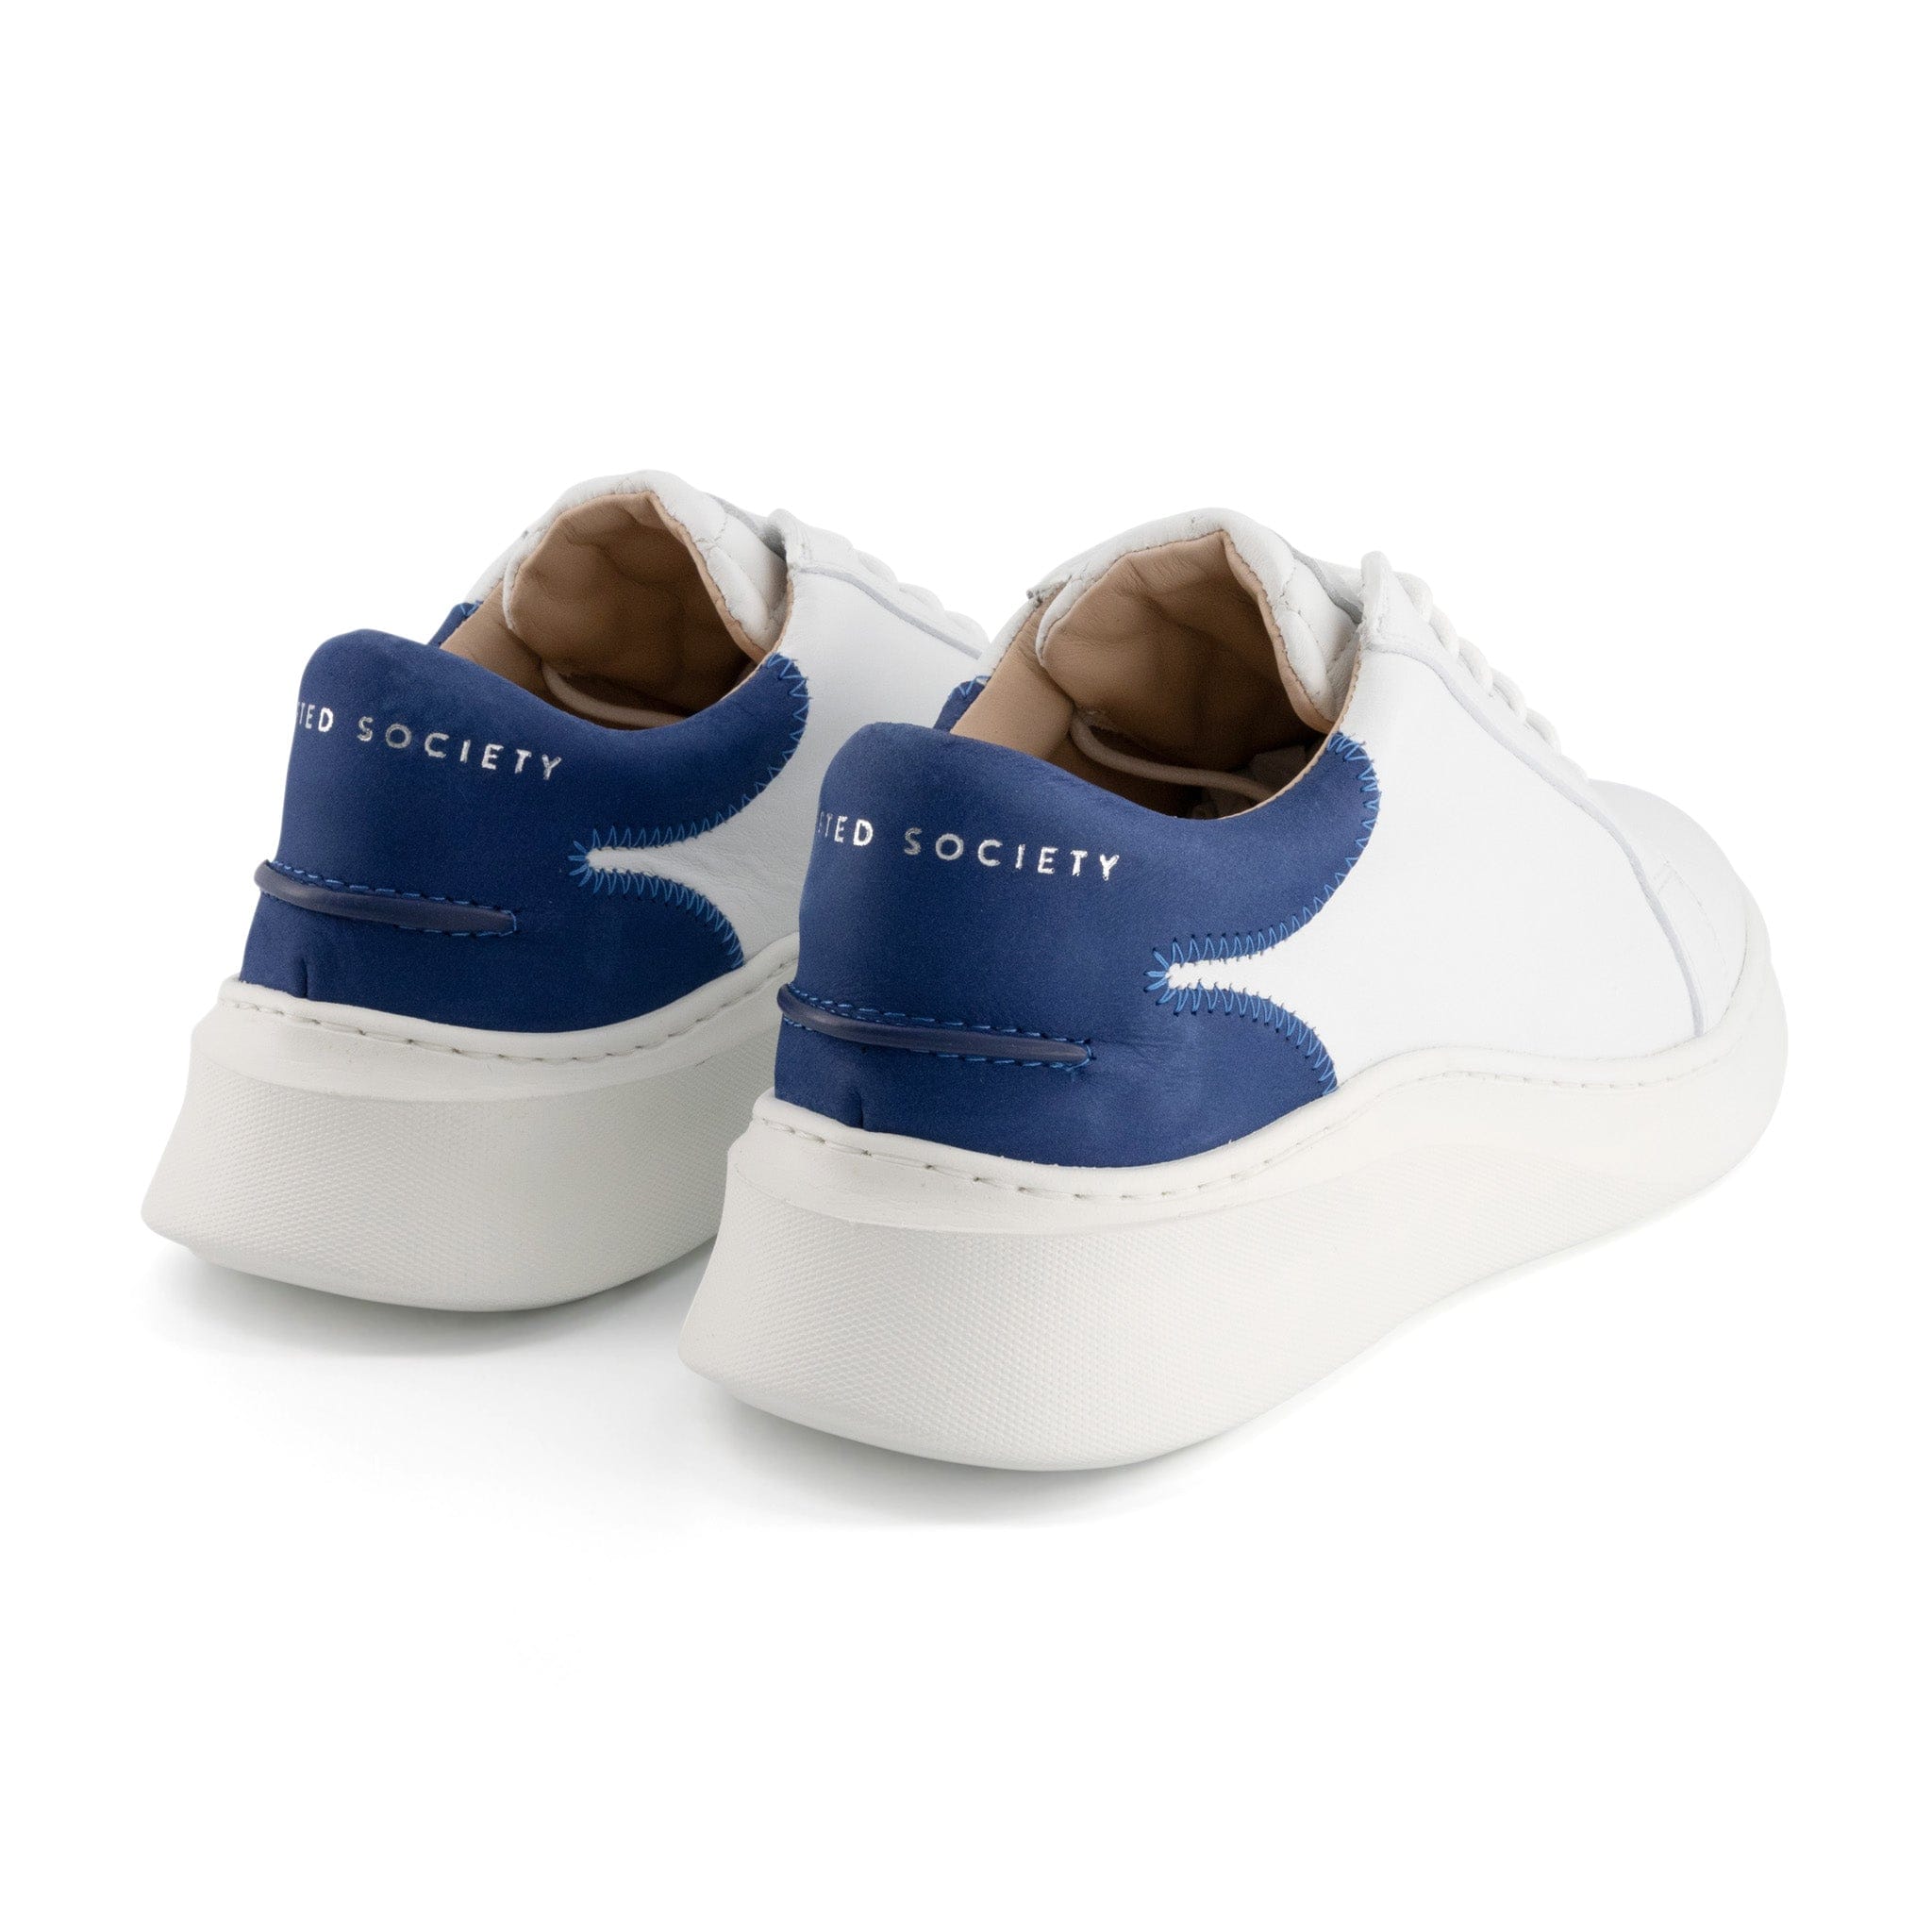 Matteo Low Top Sneaker | White & Royal Blue Full Grain Leather | White Outsole | Made in Italy